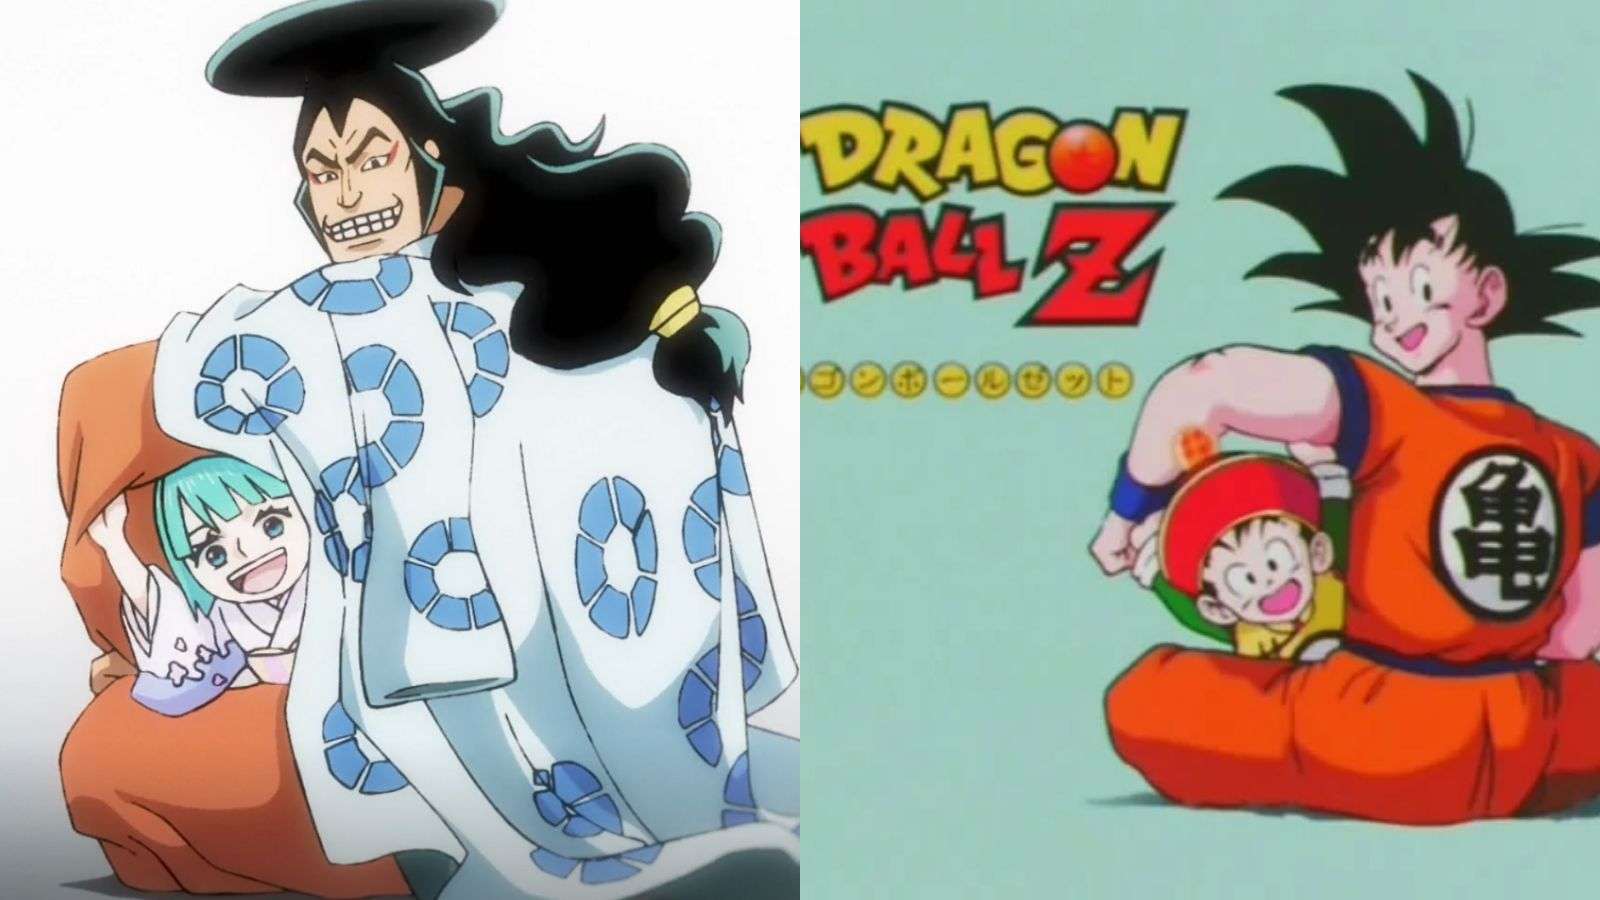 An image featuring the similarities between Dragon Ball Z and One Piece